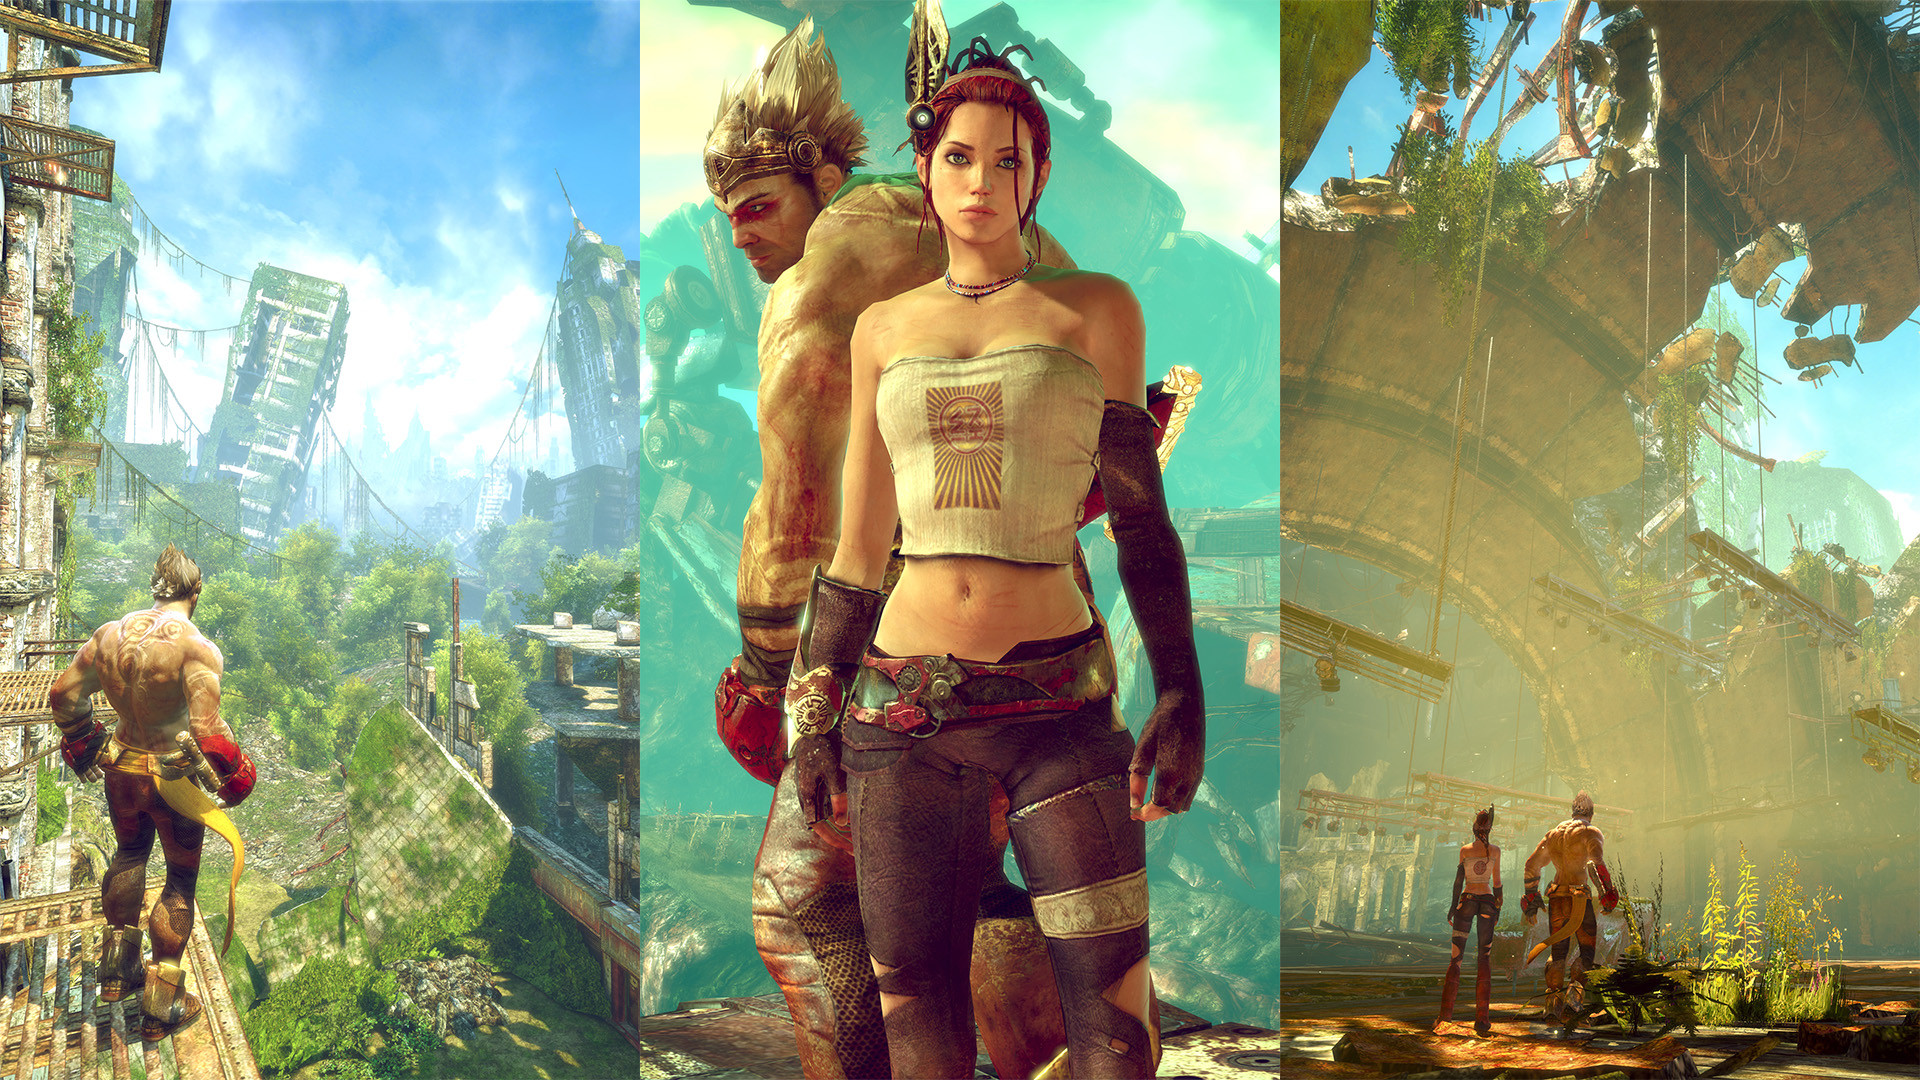 video games based on books - Enslaved: Odyssey to the West video game screenshot